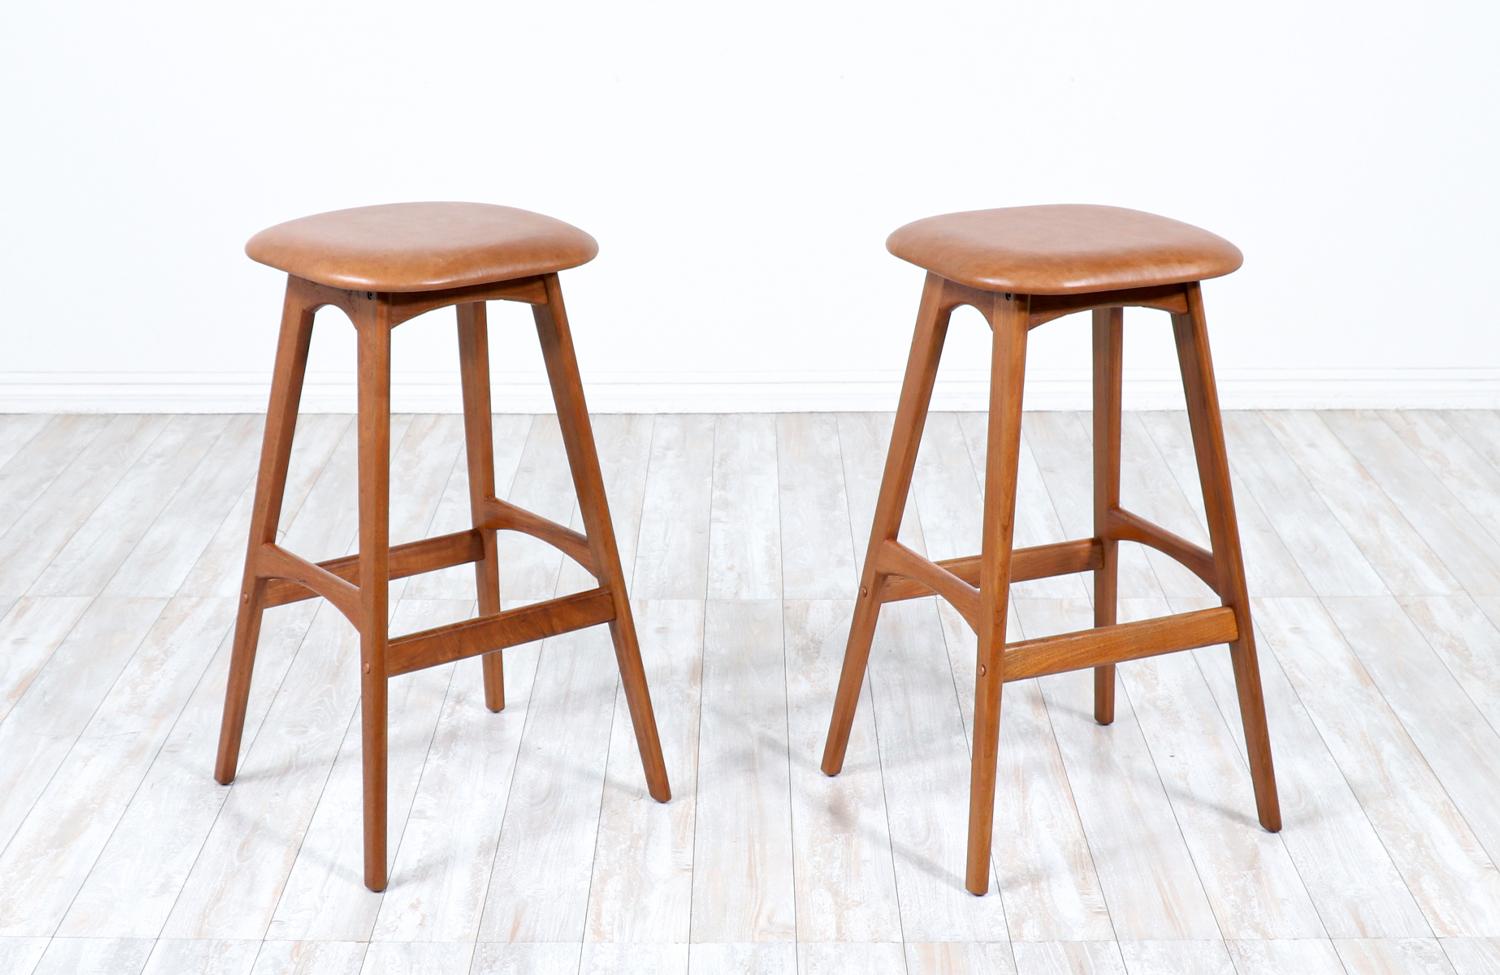 Pair of Erik Buch Teak & Tan leather bar stools.

________________________________________

Transforming a piece of Mid-Century Modern furniture is like bringing history back to life, and we take this journey with passion and precision. With over 17